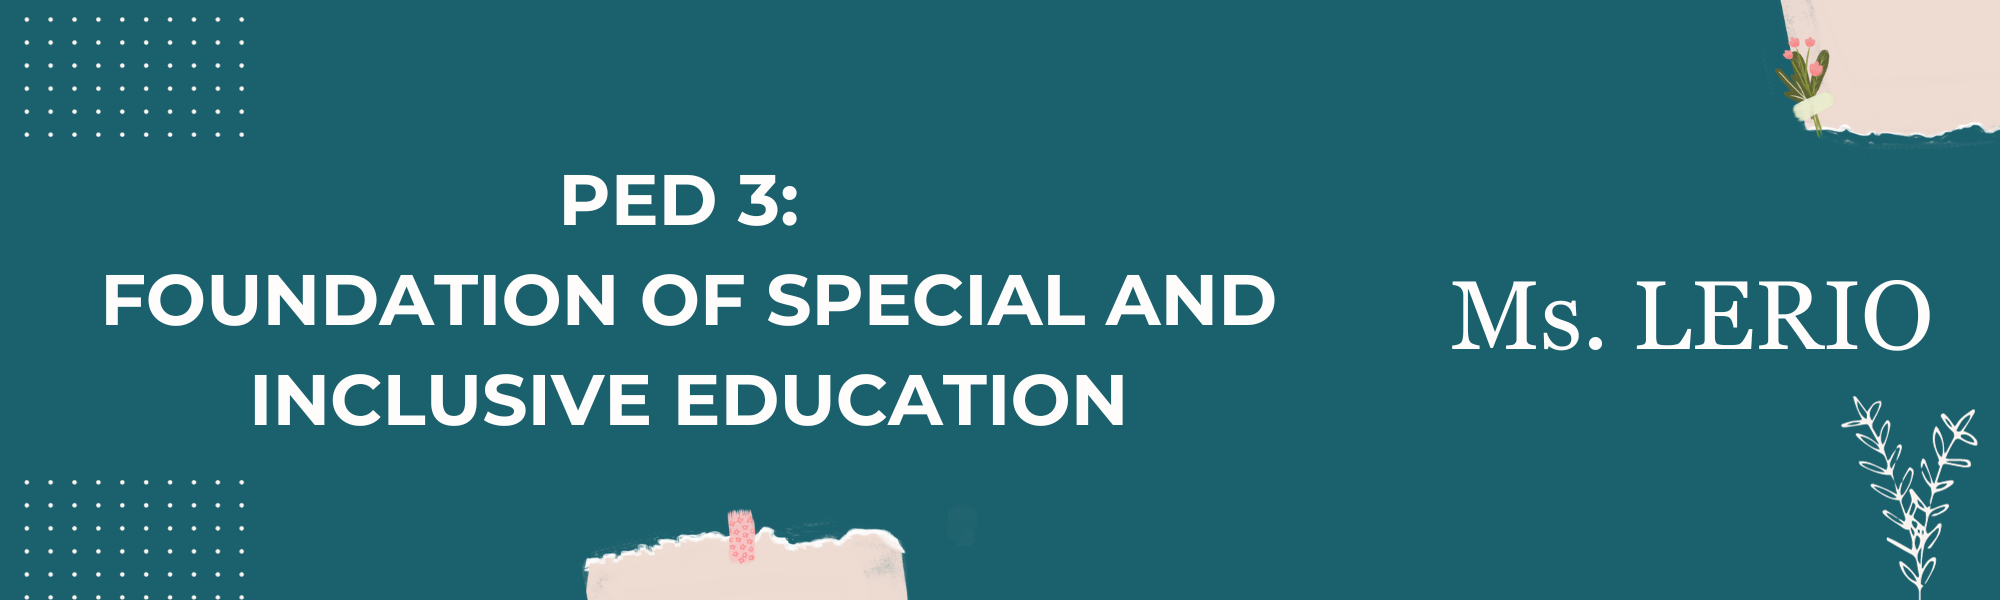 P.Ed 3 - Foundation of Special and Inclusive Education